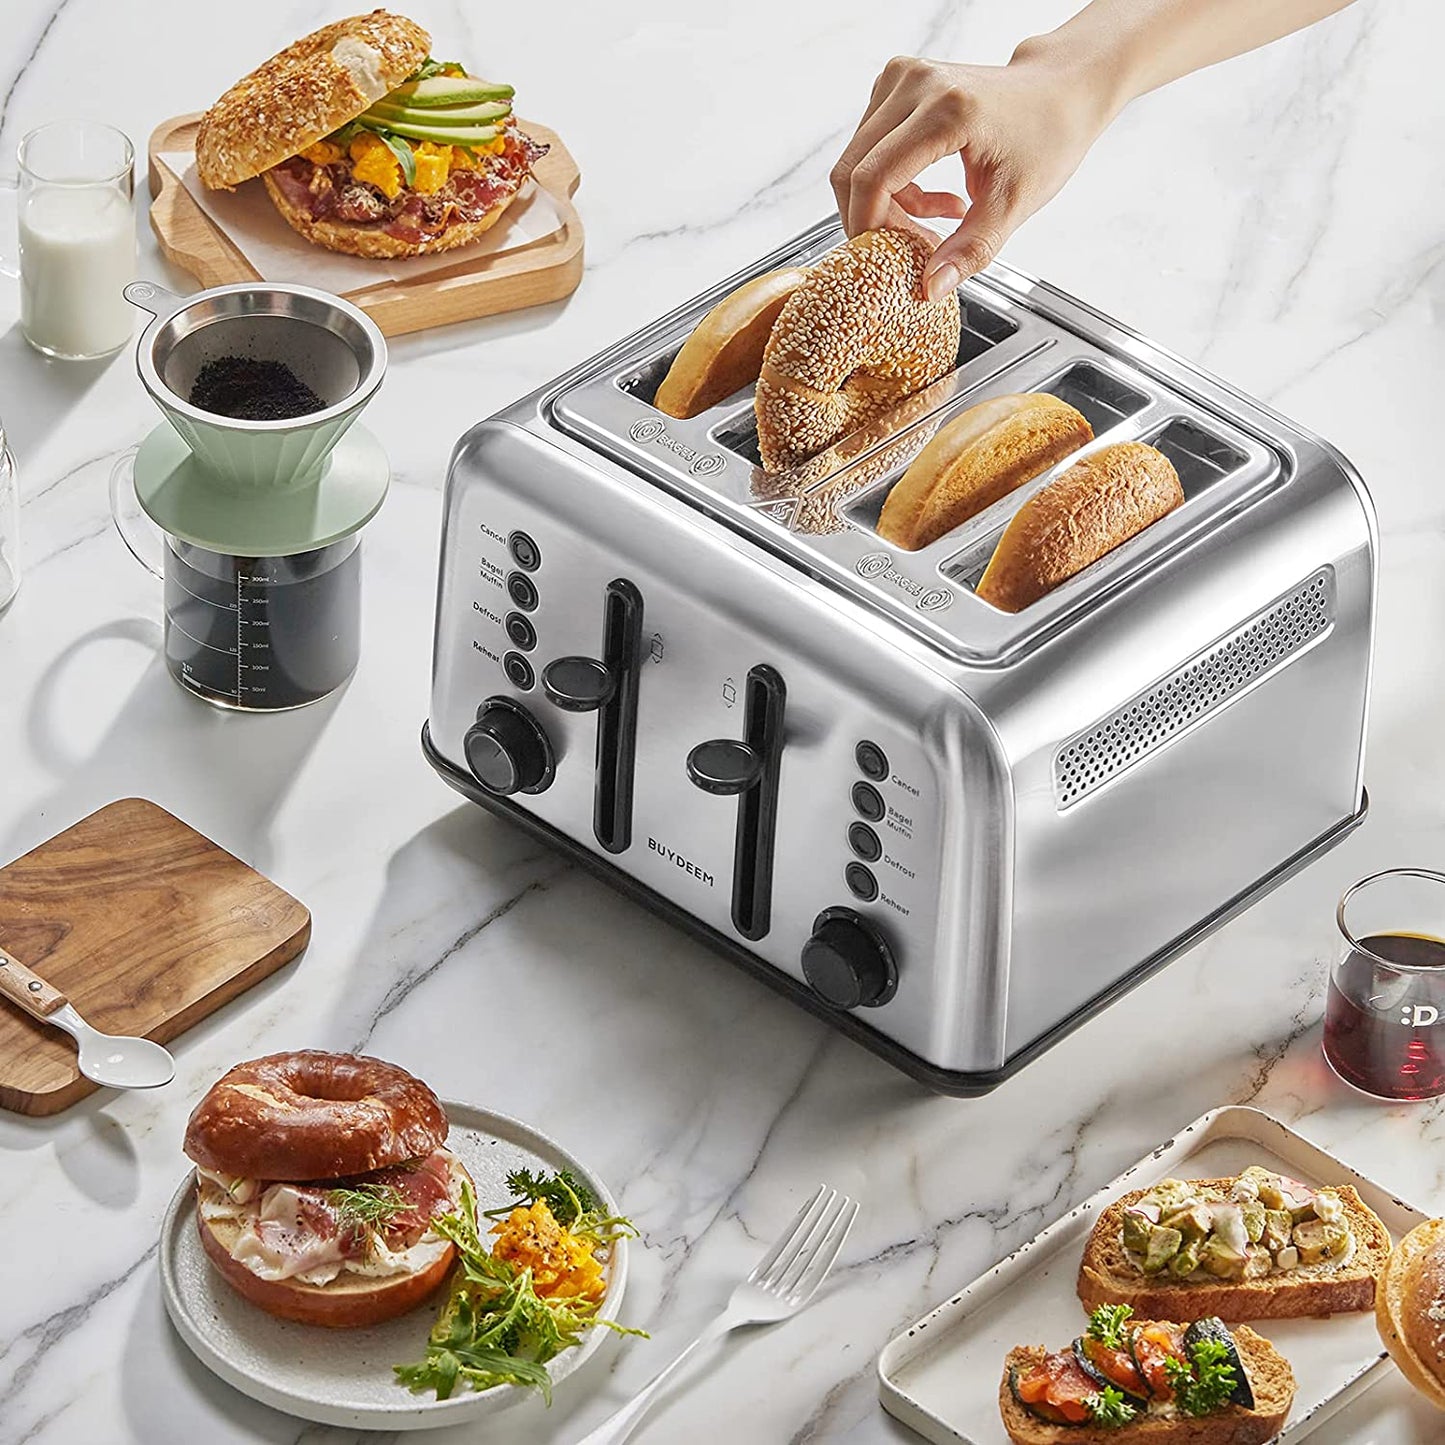 DT640 4-Slice Toaster, Extra Wide Slots, Retro Stainless Steel with High Lift Lever, Bagel and Muffin Function, Removal Crumb Tray, 7-Shade Settings (Stainless Steel)